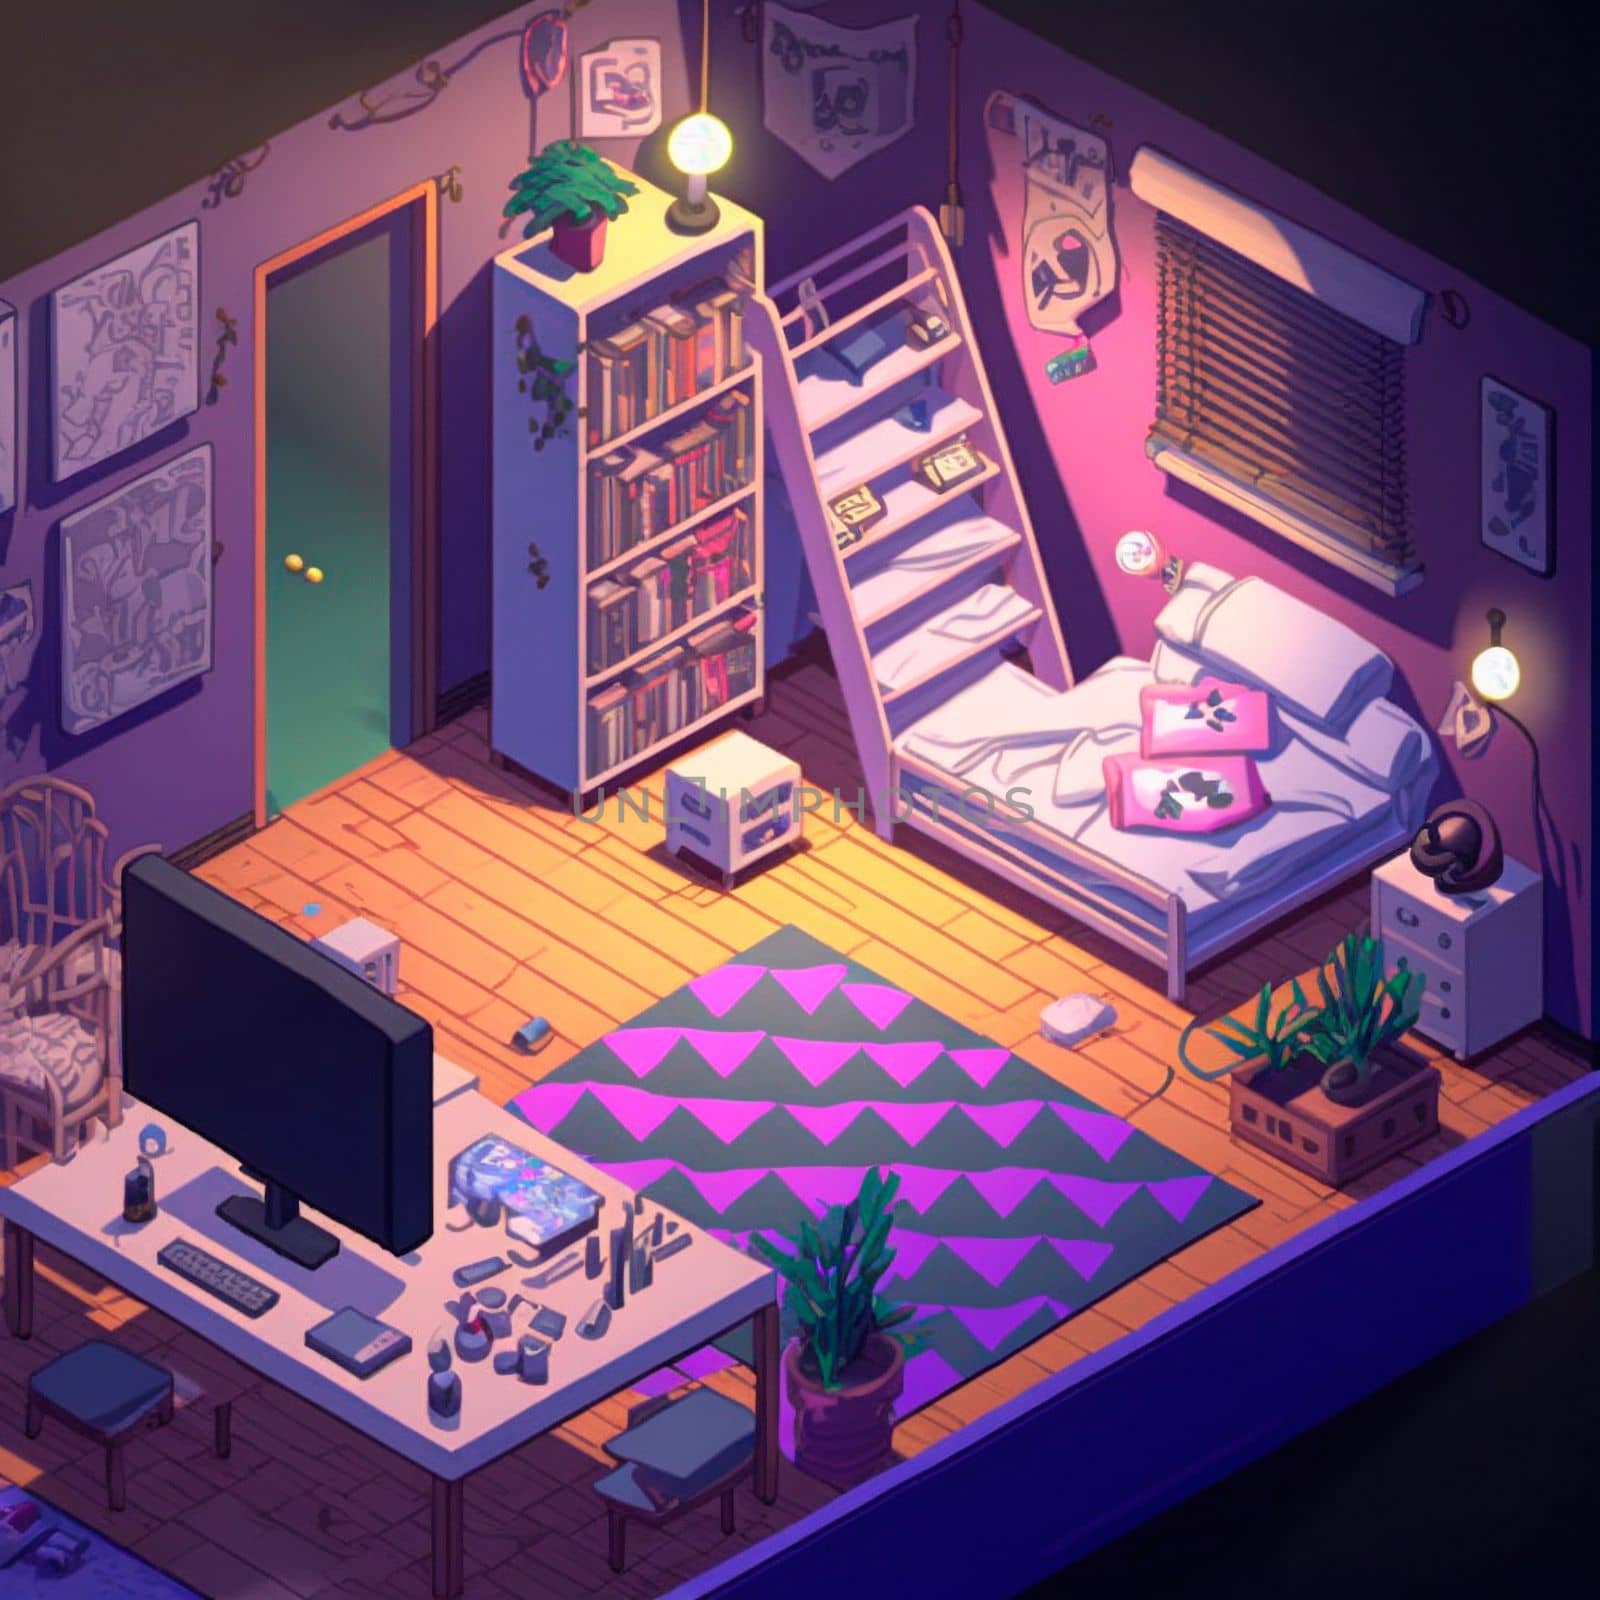 isometric image of the bedroom. High quality illustration